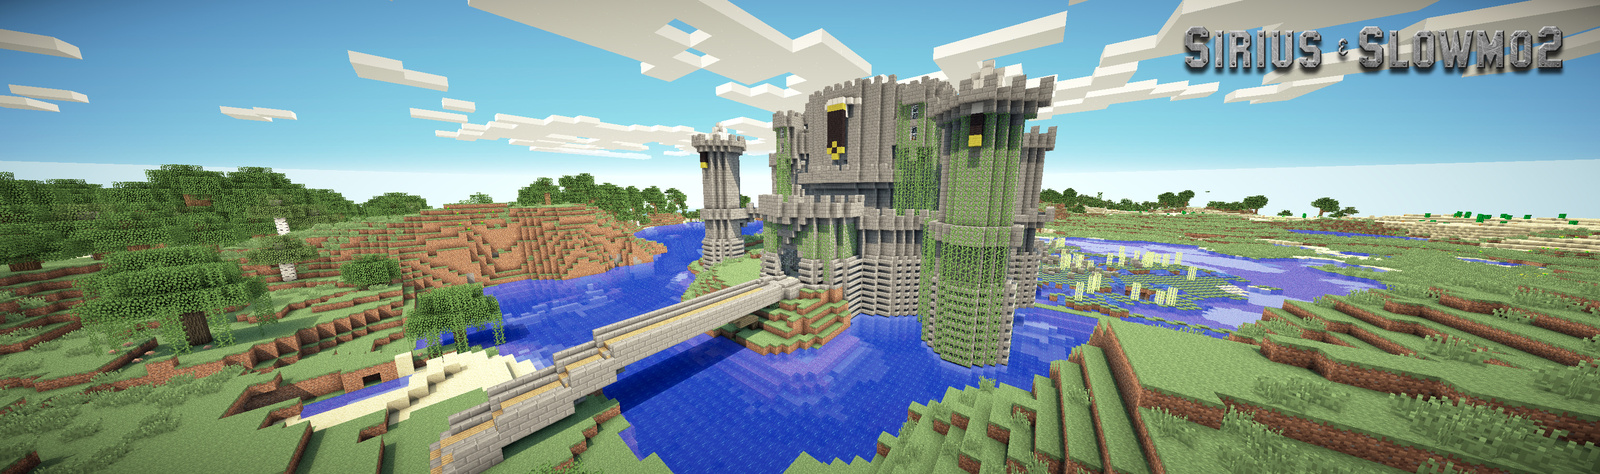 Stronghold2 3040x900